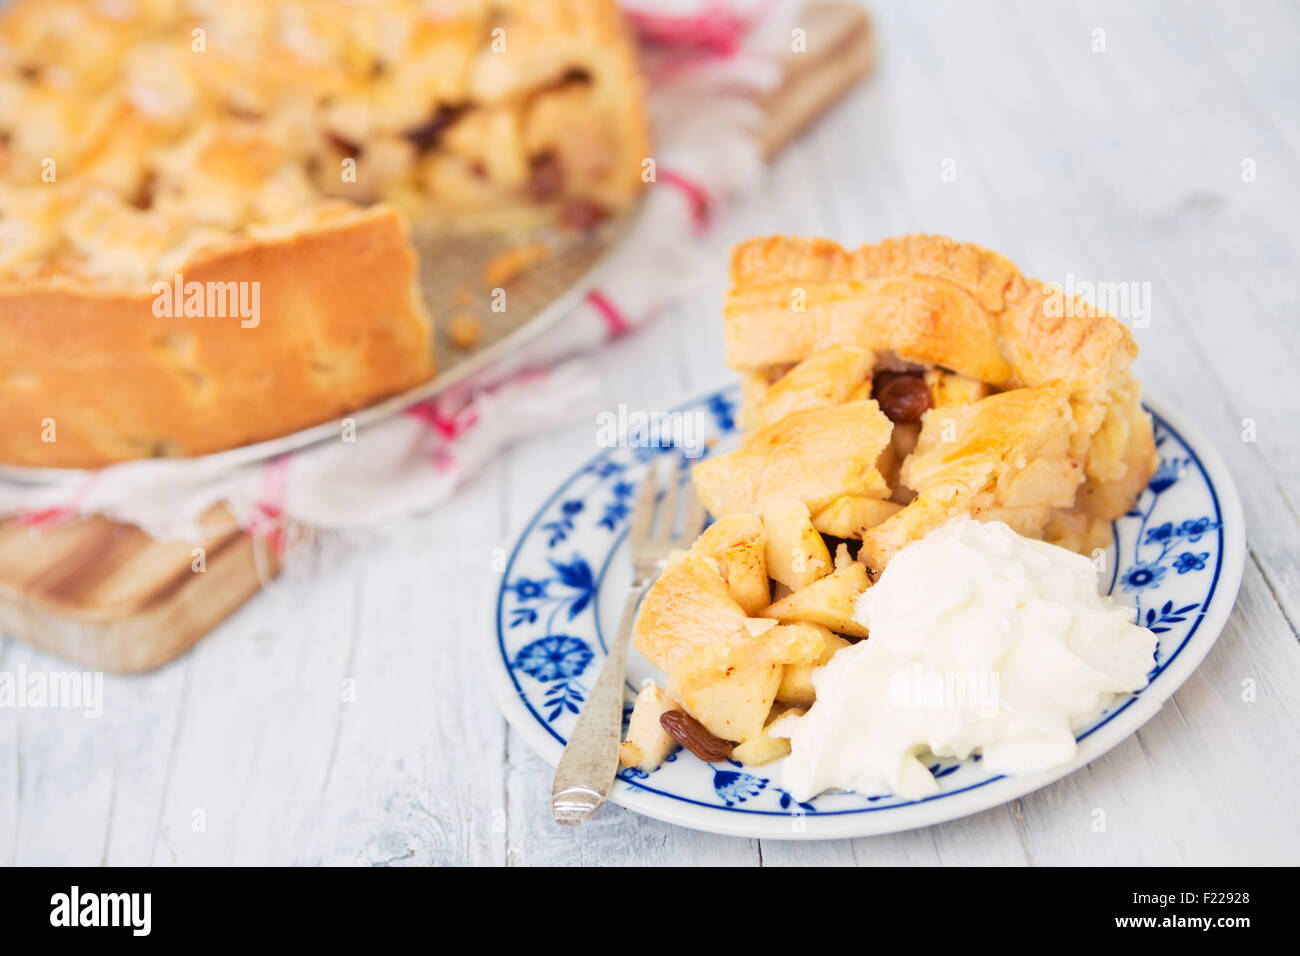 Homemade Dutch apple pie with whipped cream on a rustic table. Stock Photo